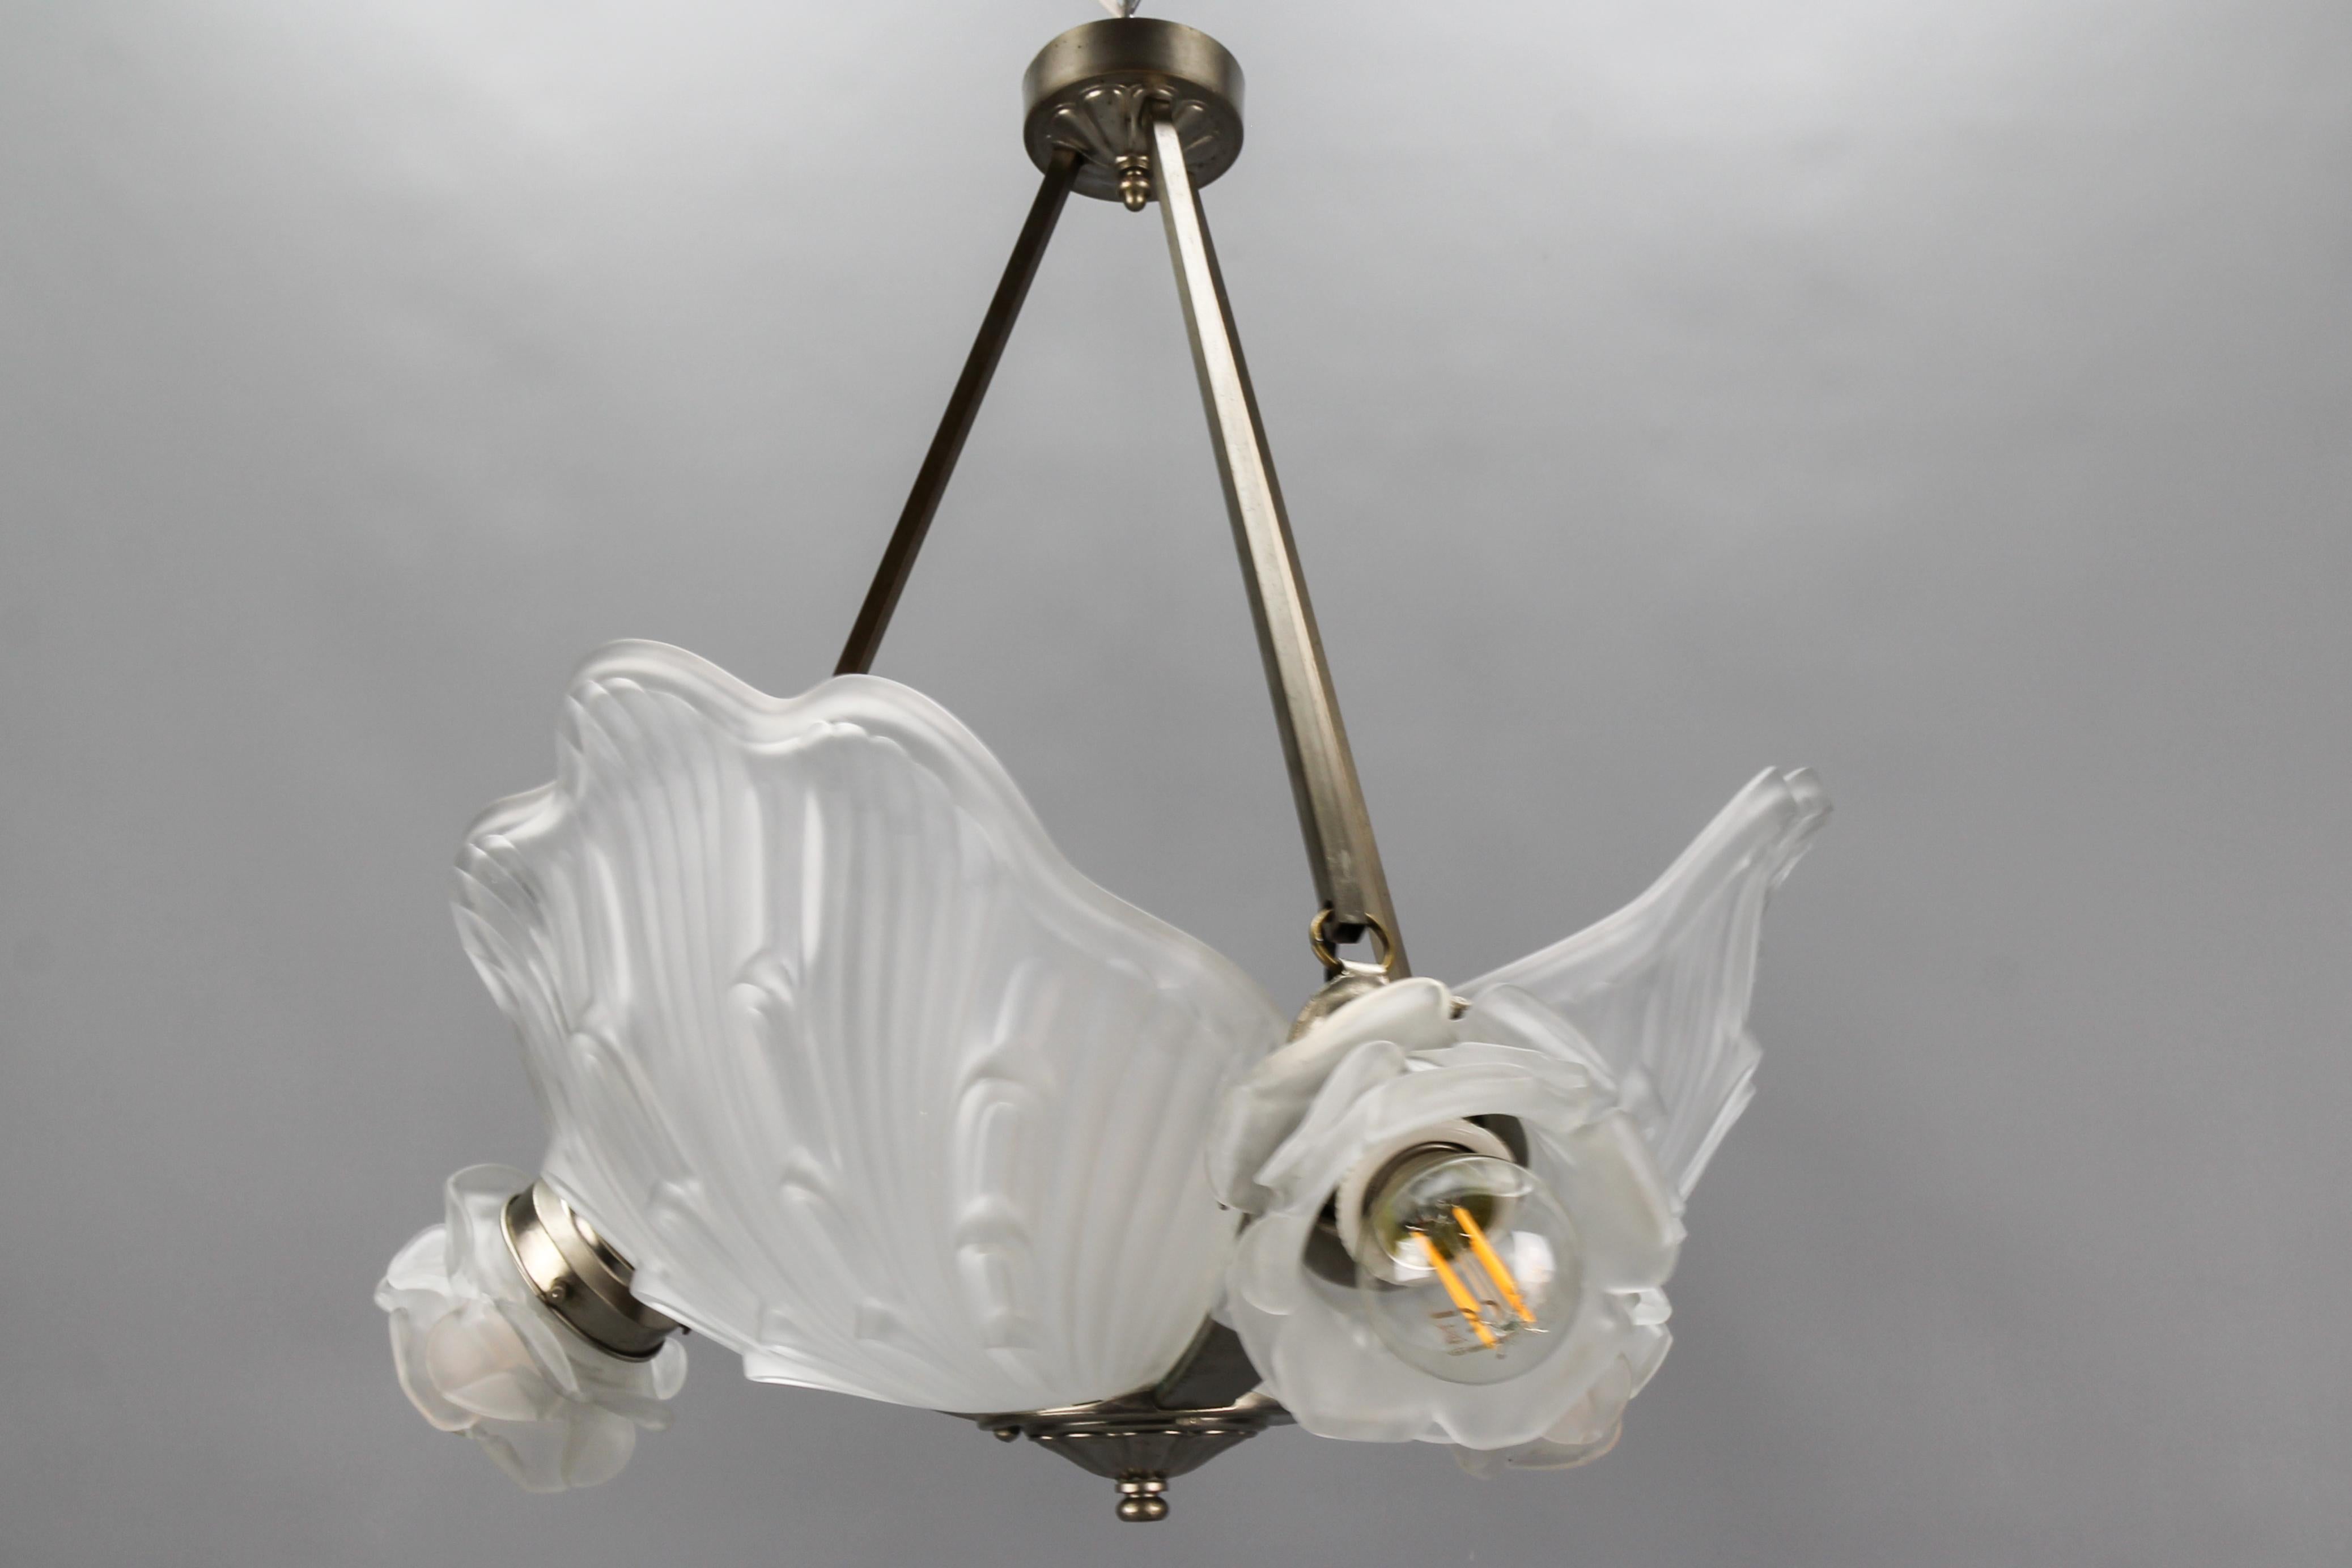 French Art Deco Four-Light White Frosted Glass Shell Chandelier, 1930s For Sale 1